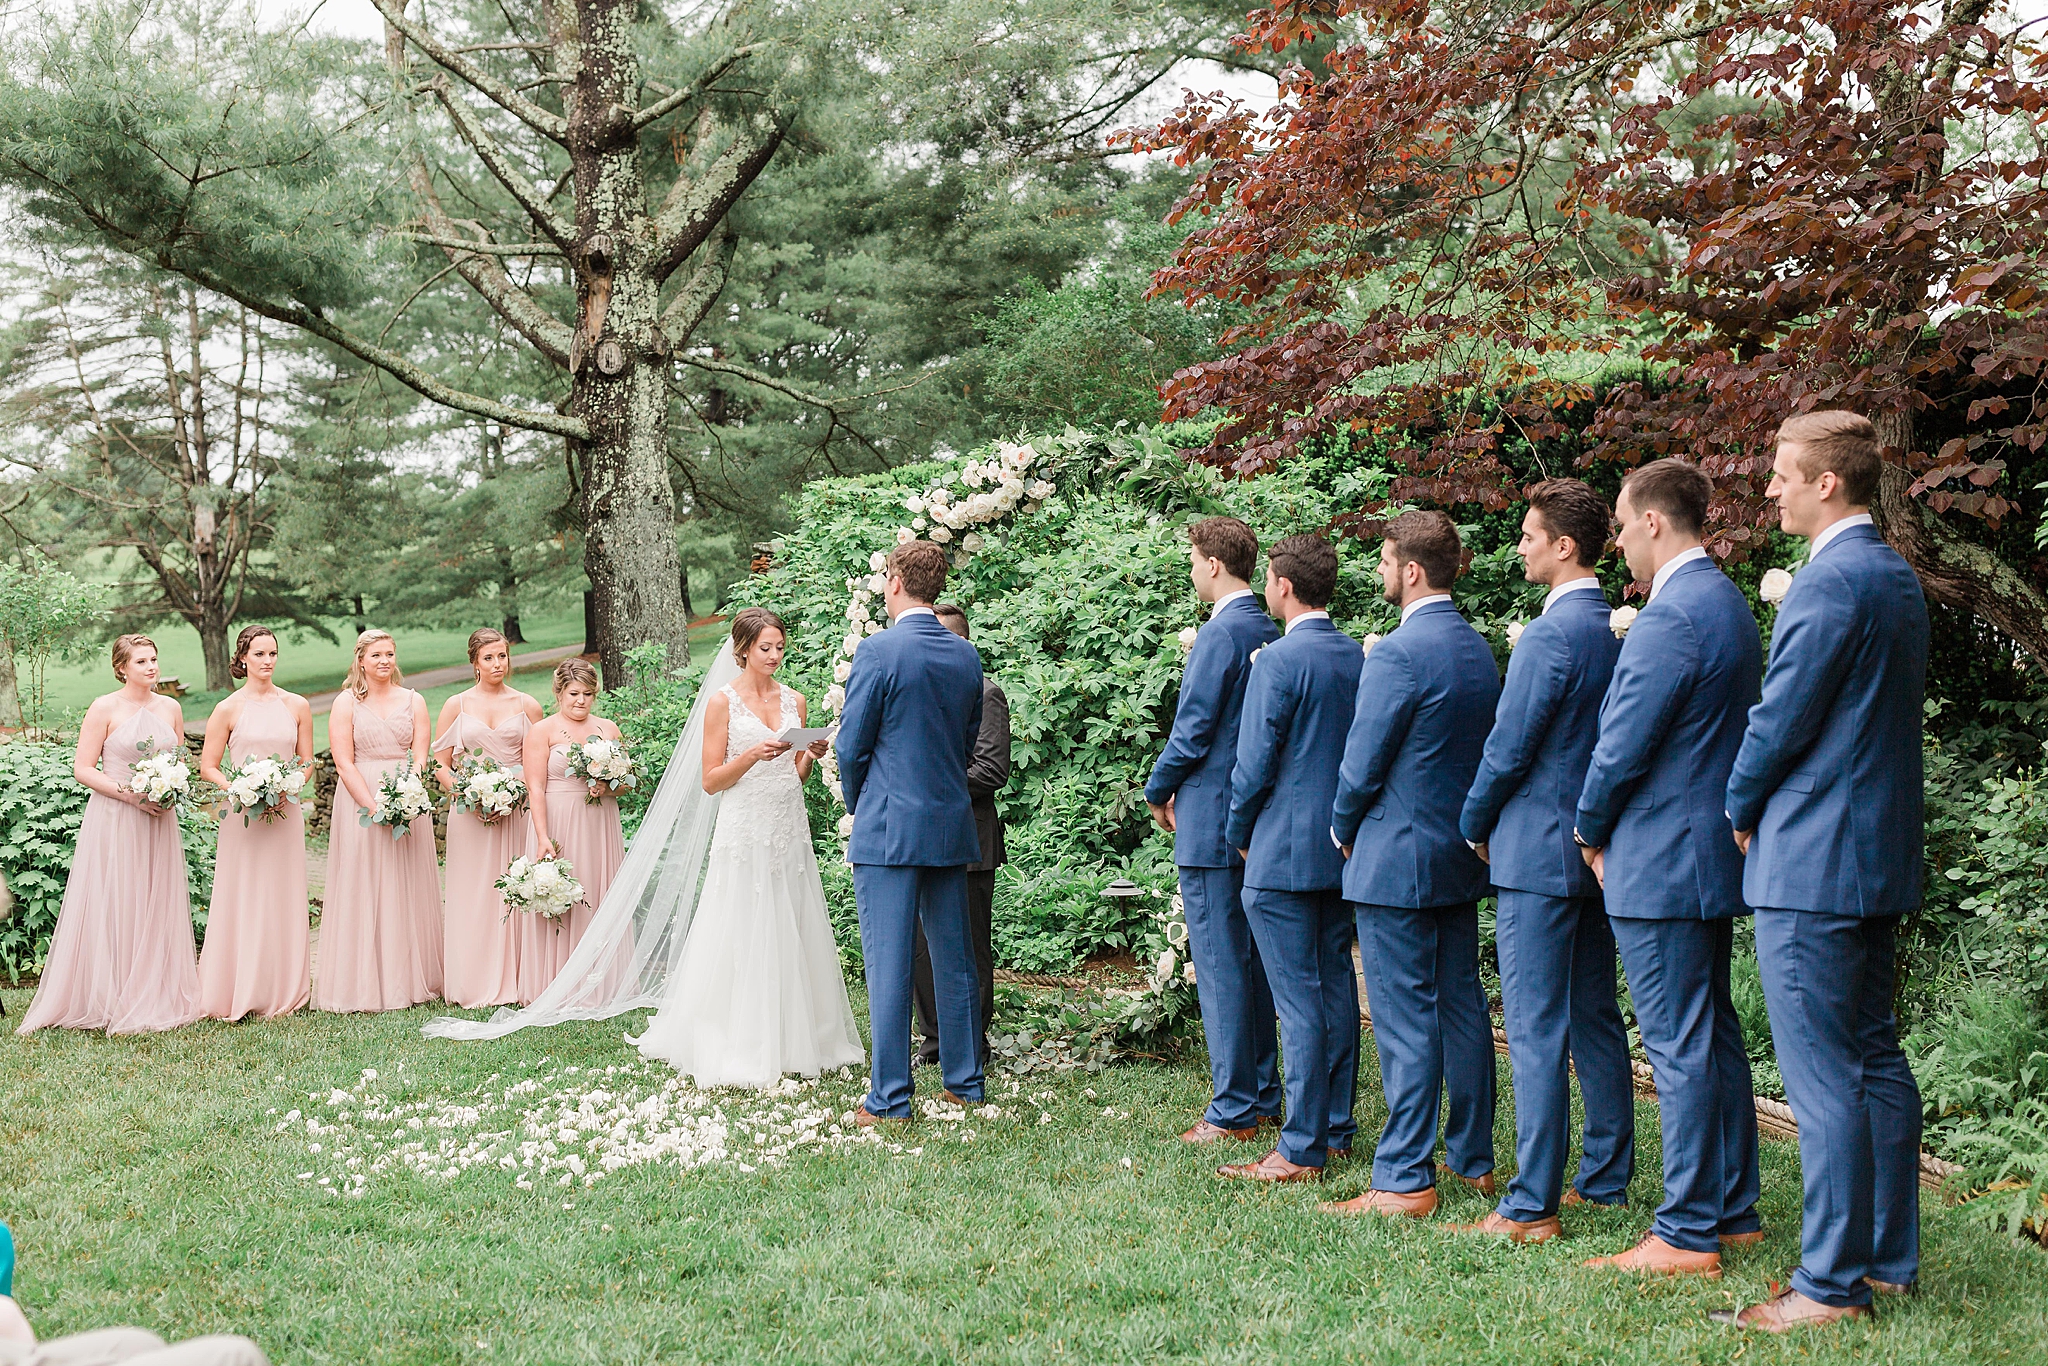 To wrap up the 2018 season, this Washington, DC wedding photographer is sharing superlatives from the most stunning affairs of the year!